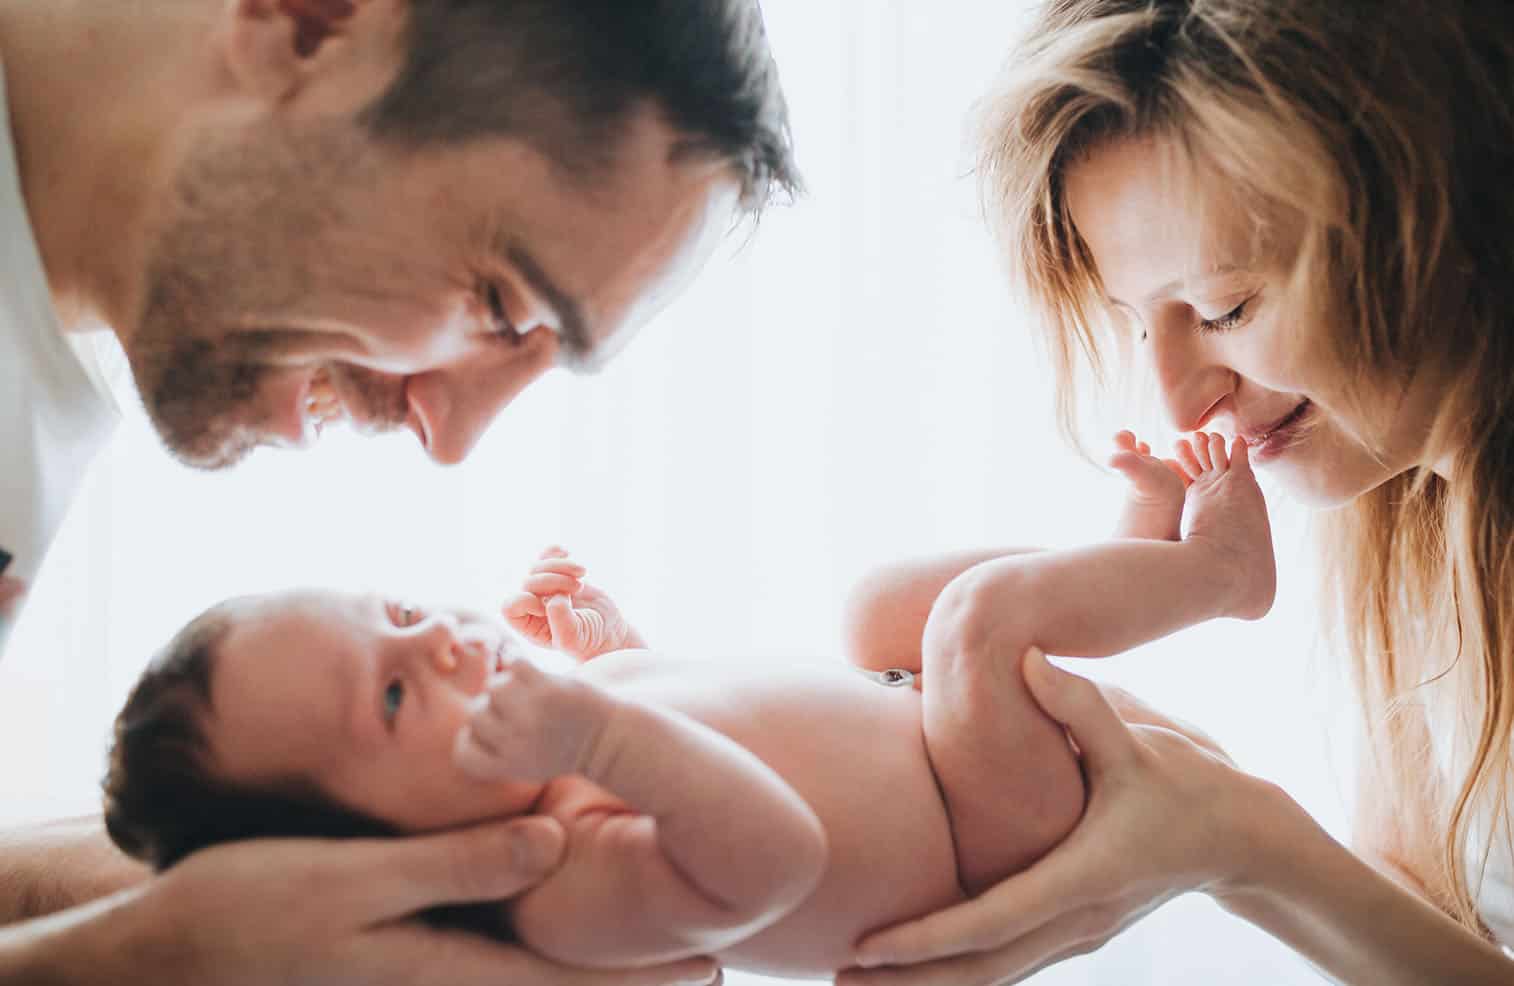 We have all these expectations of what life is going to be like as a new mom, but we tend to overlook the hardest things about life with a newborn baby.